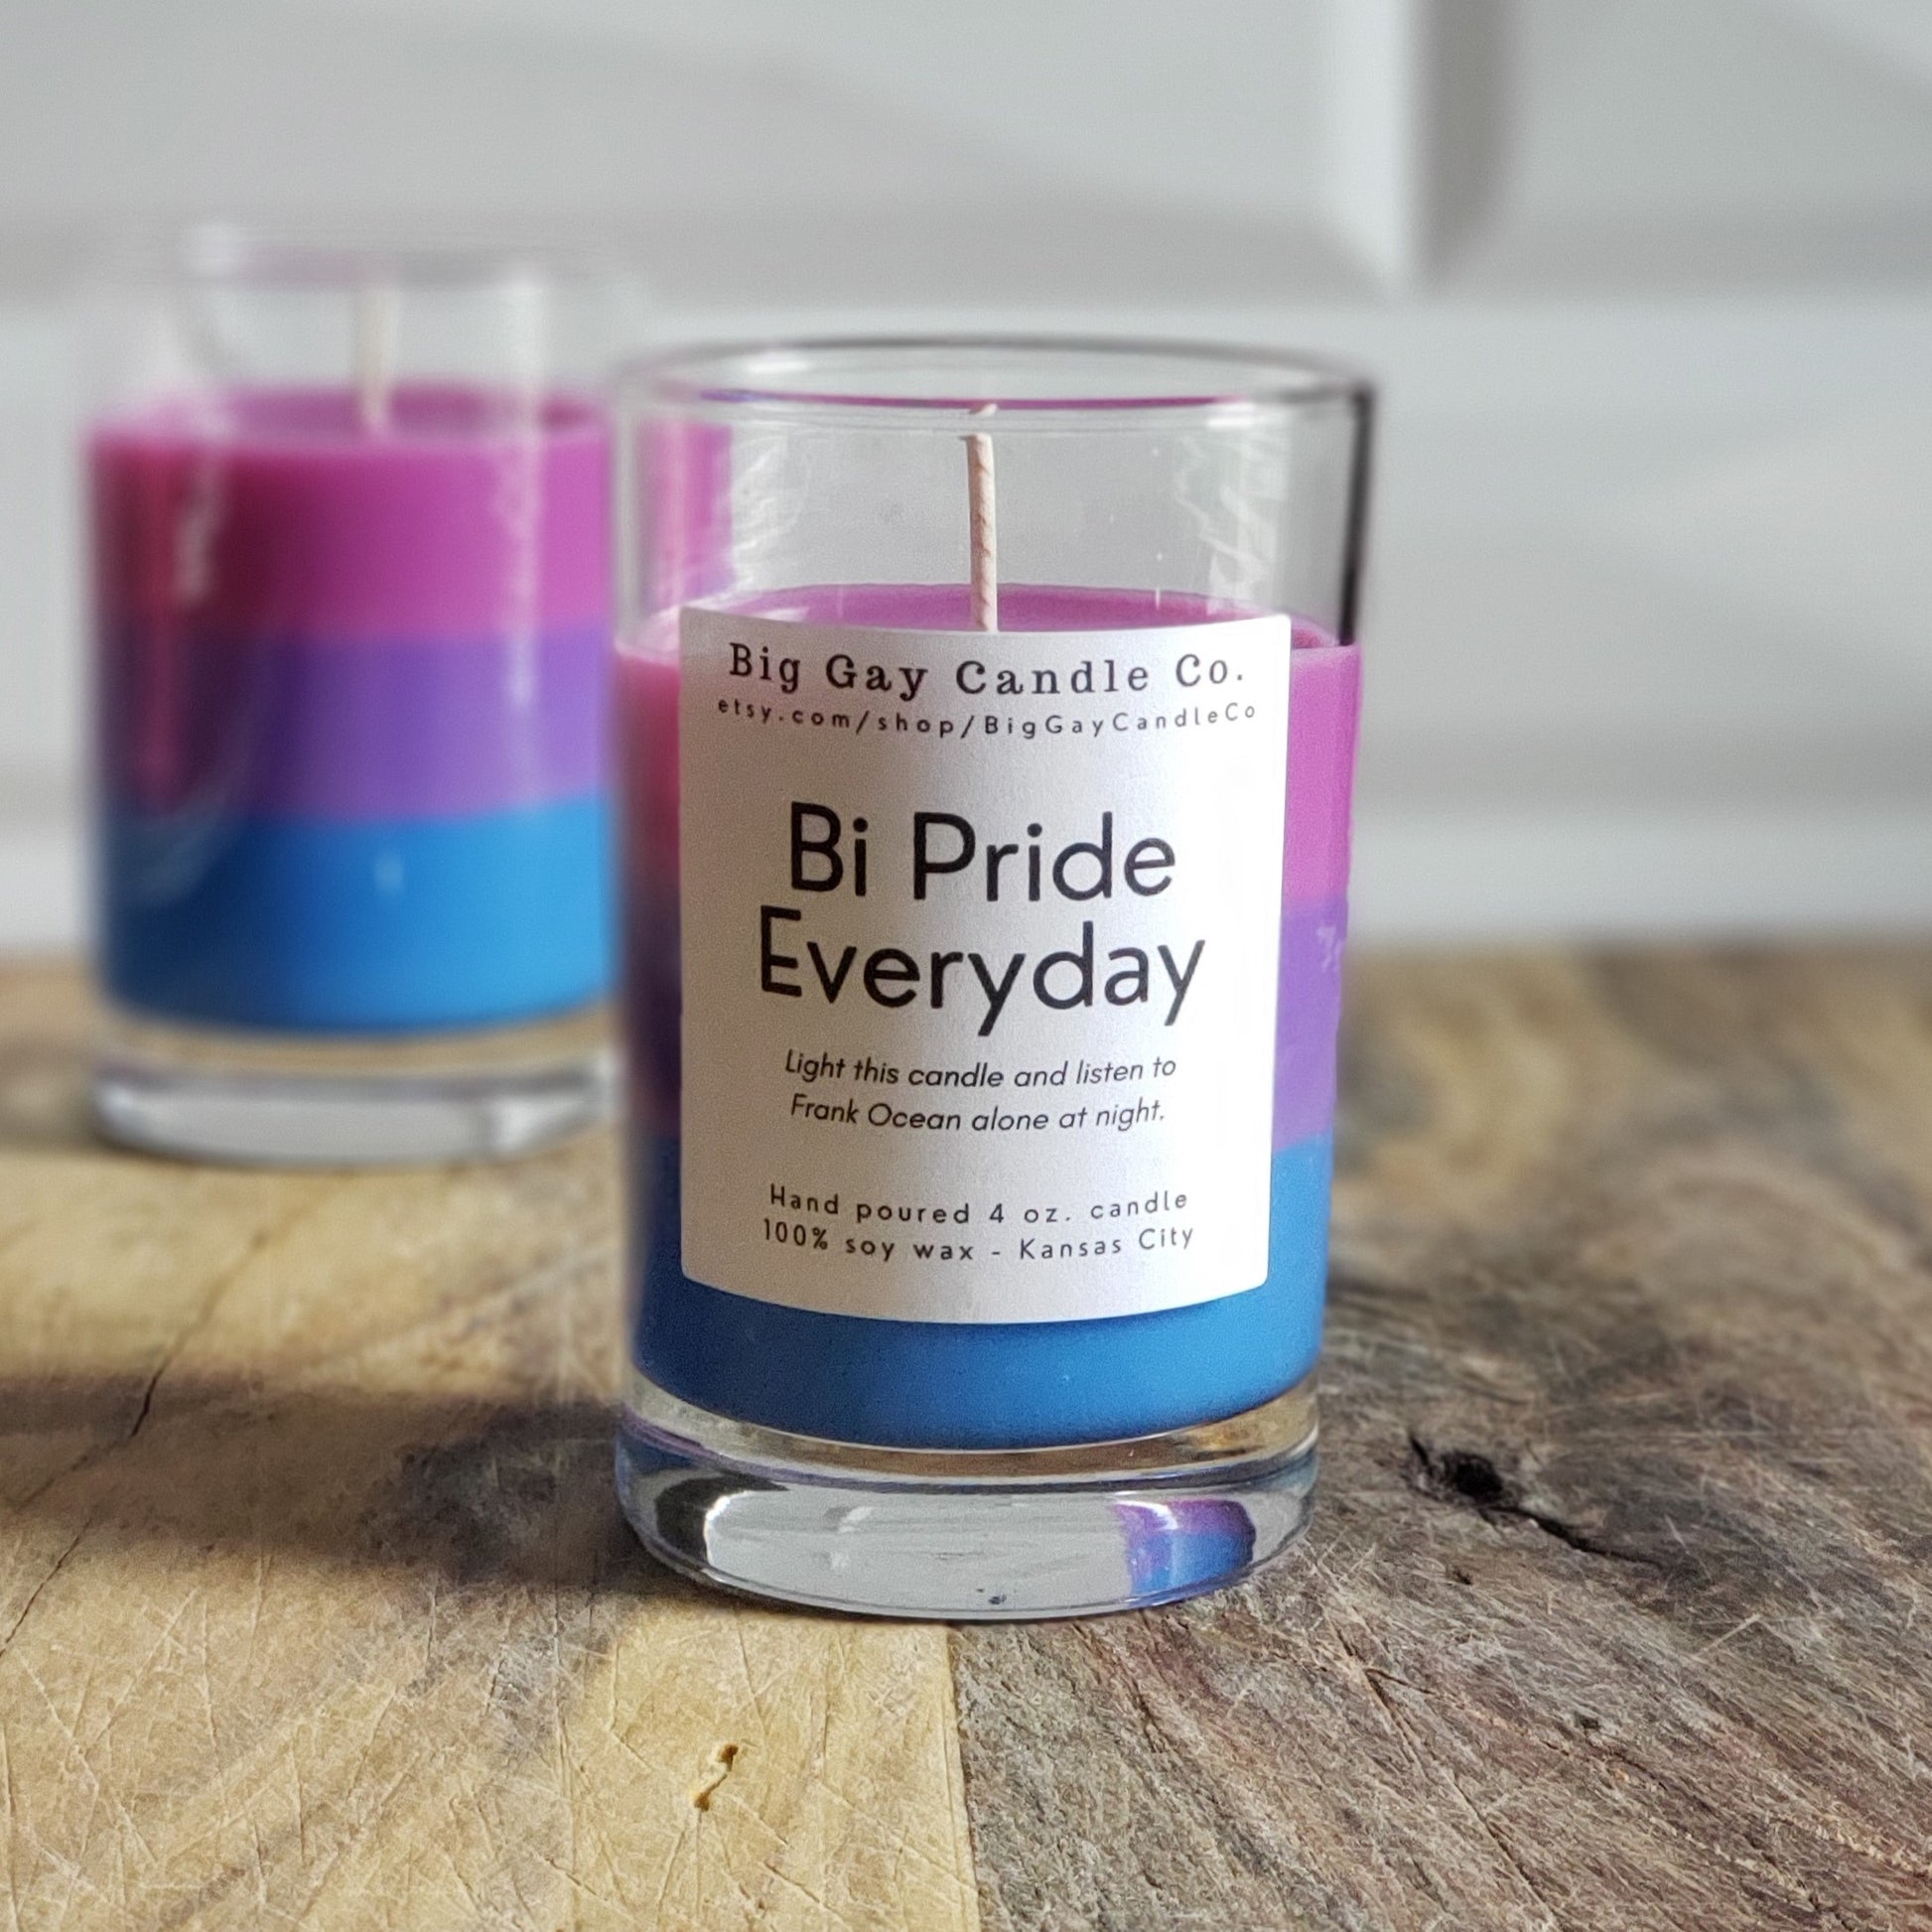 Layered candle of pink, purple, and blue wax in a glass vessel with a black and white label that says Bi Pride Everyday: Light this candle and listen to Frank Ocean alone at night. Sitting in front of another layered candle without a label in front of a white tile background and sitting on a wood board.